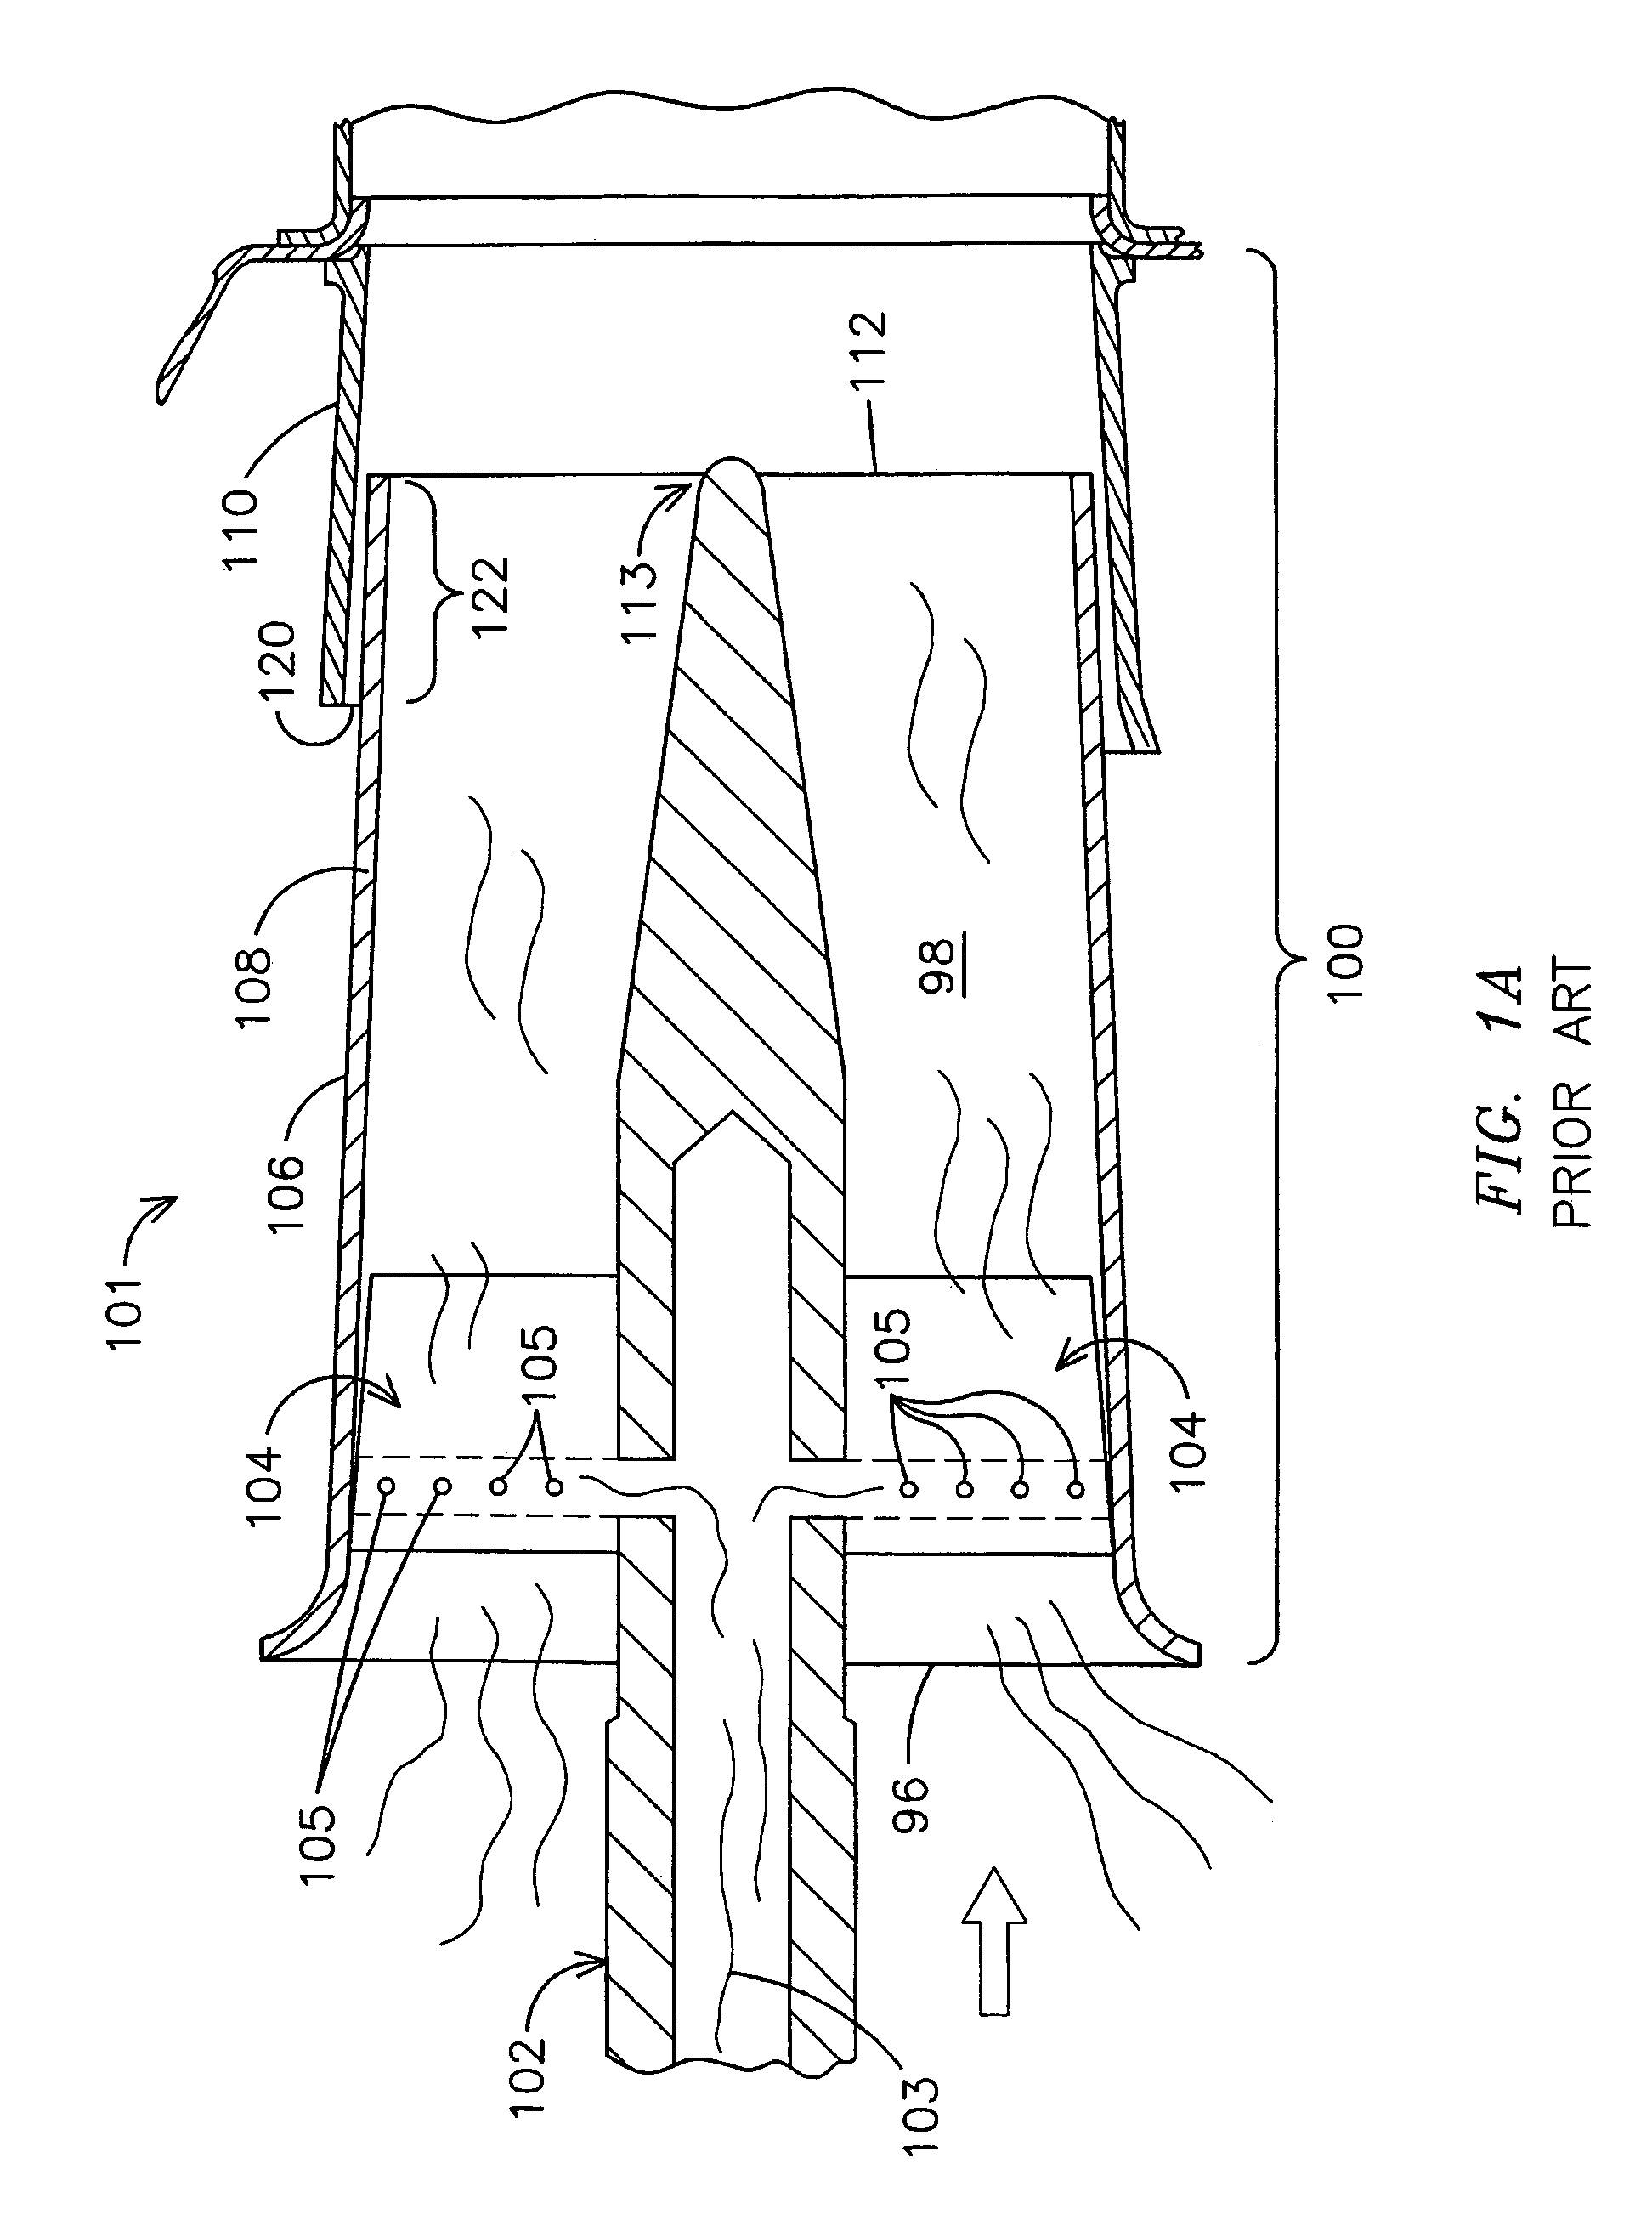 Extended flashback annulus in a gas turbine combustor